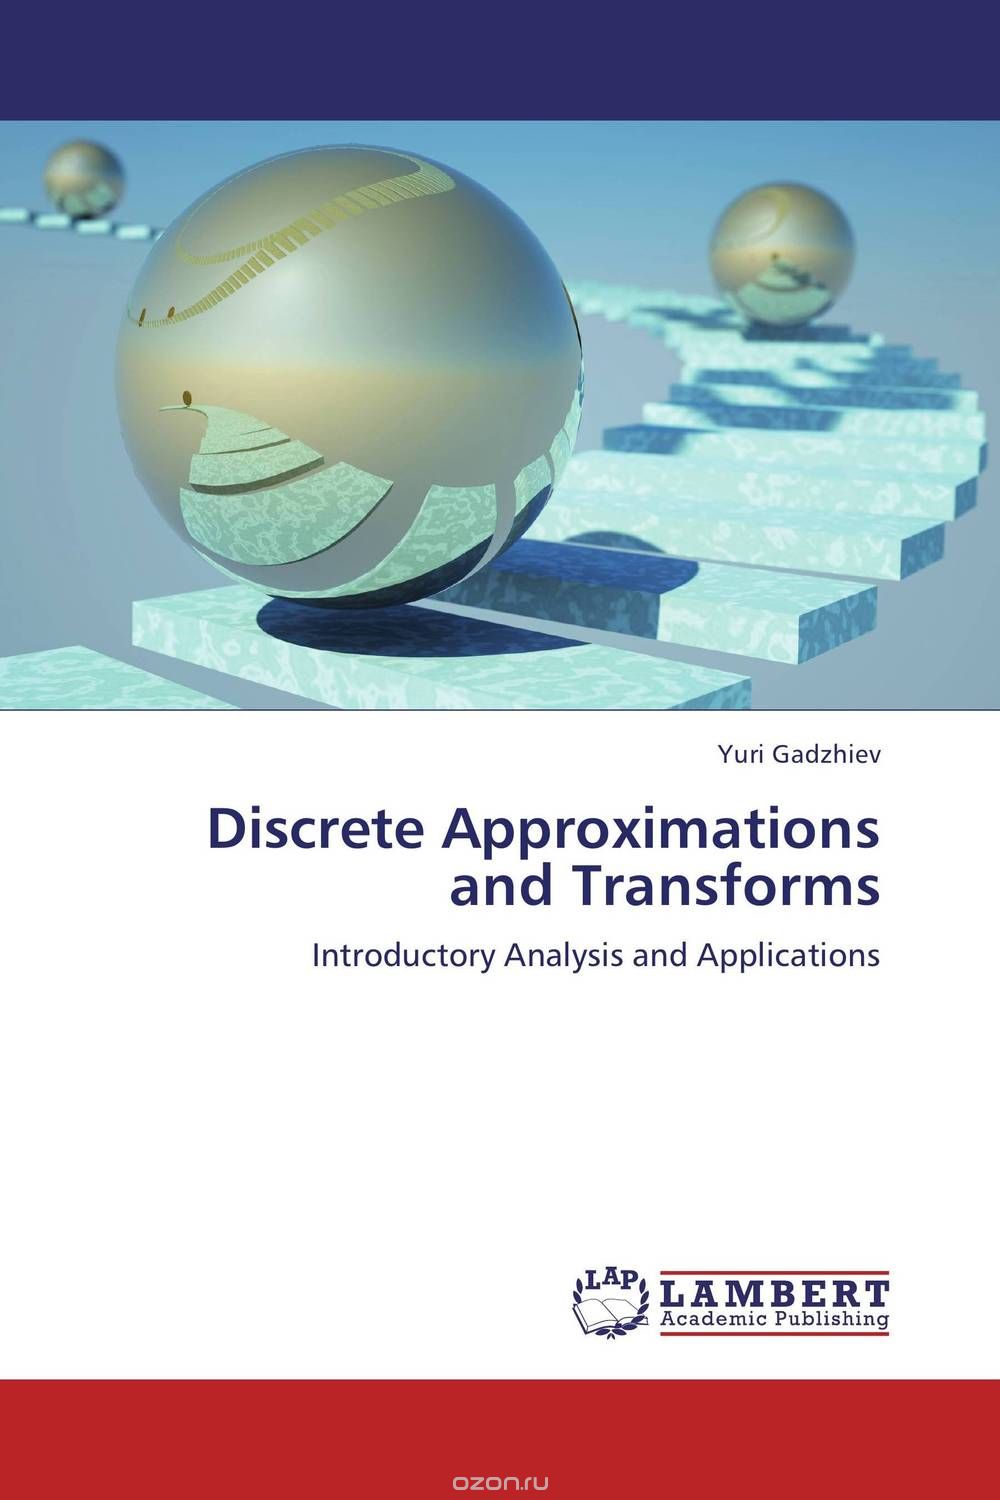 Discrete Approximations and Transforms